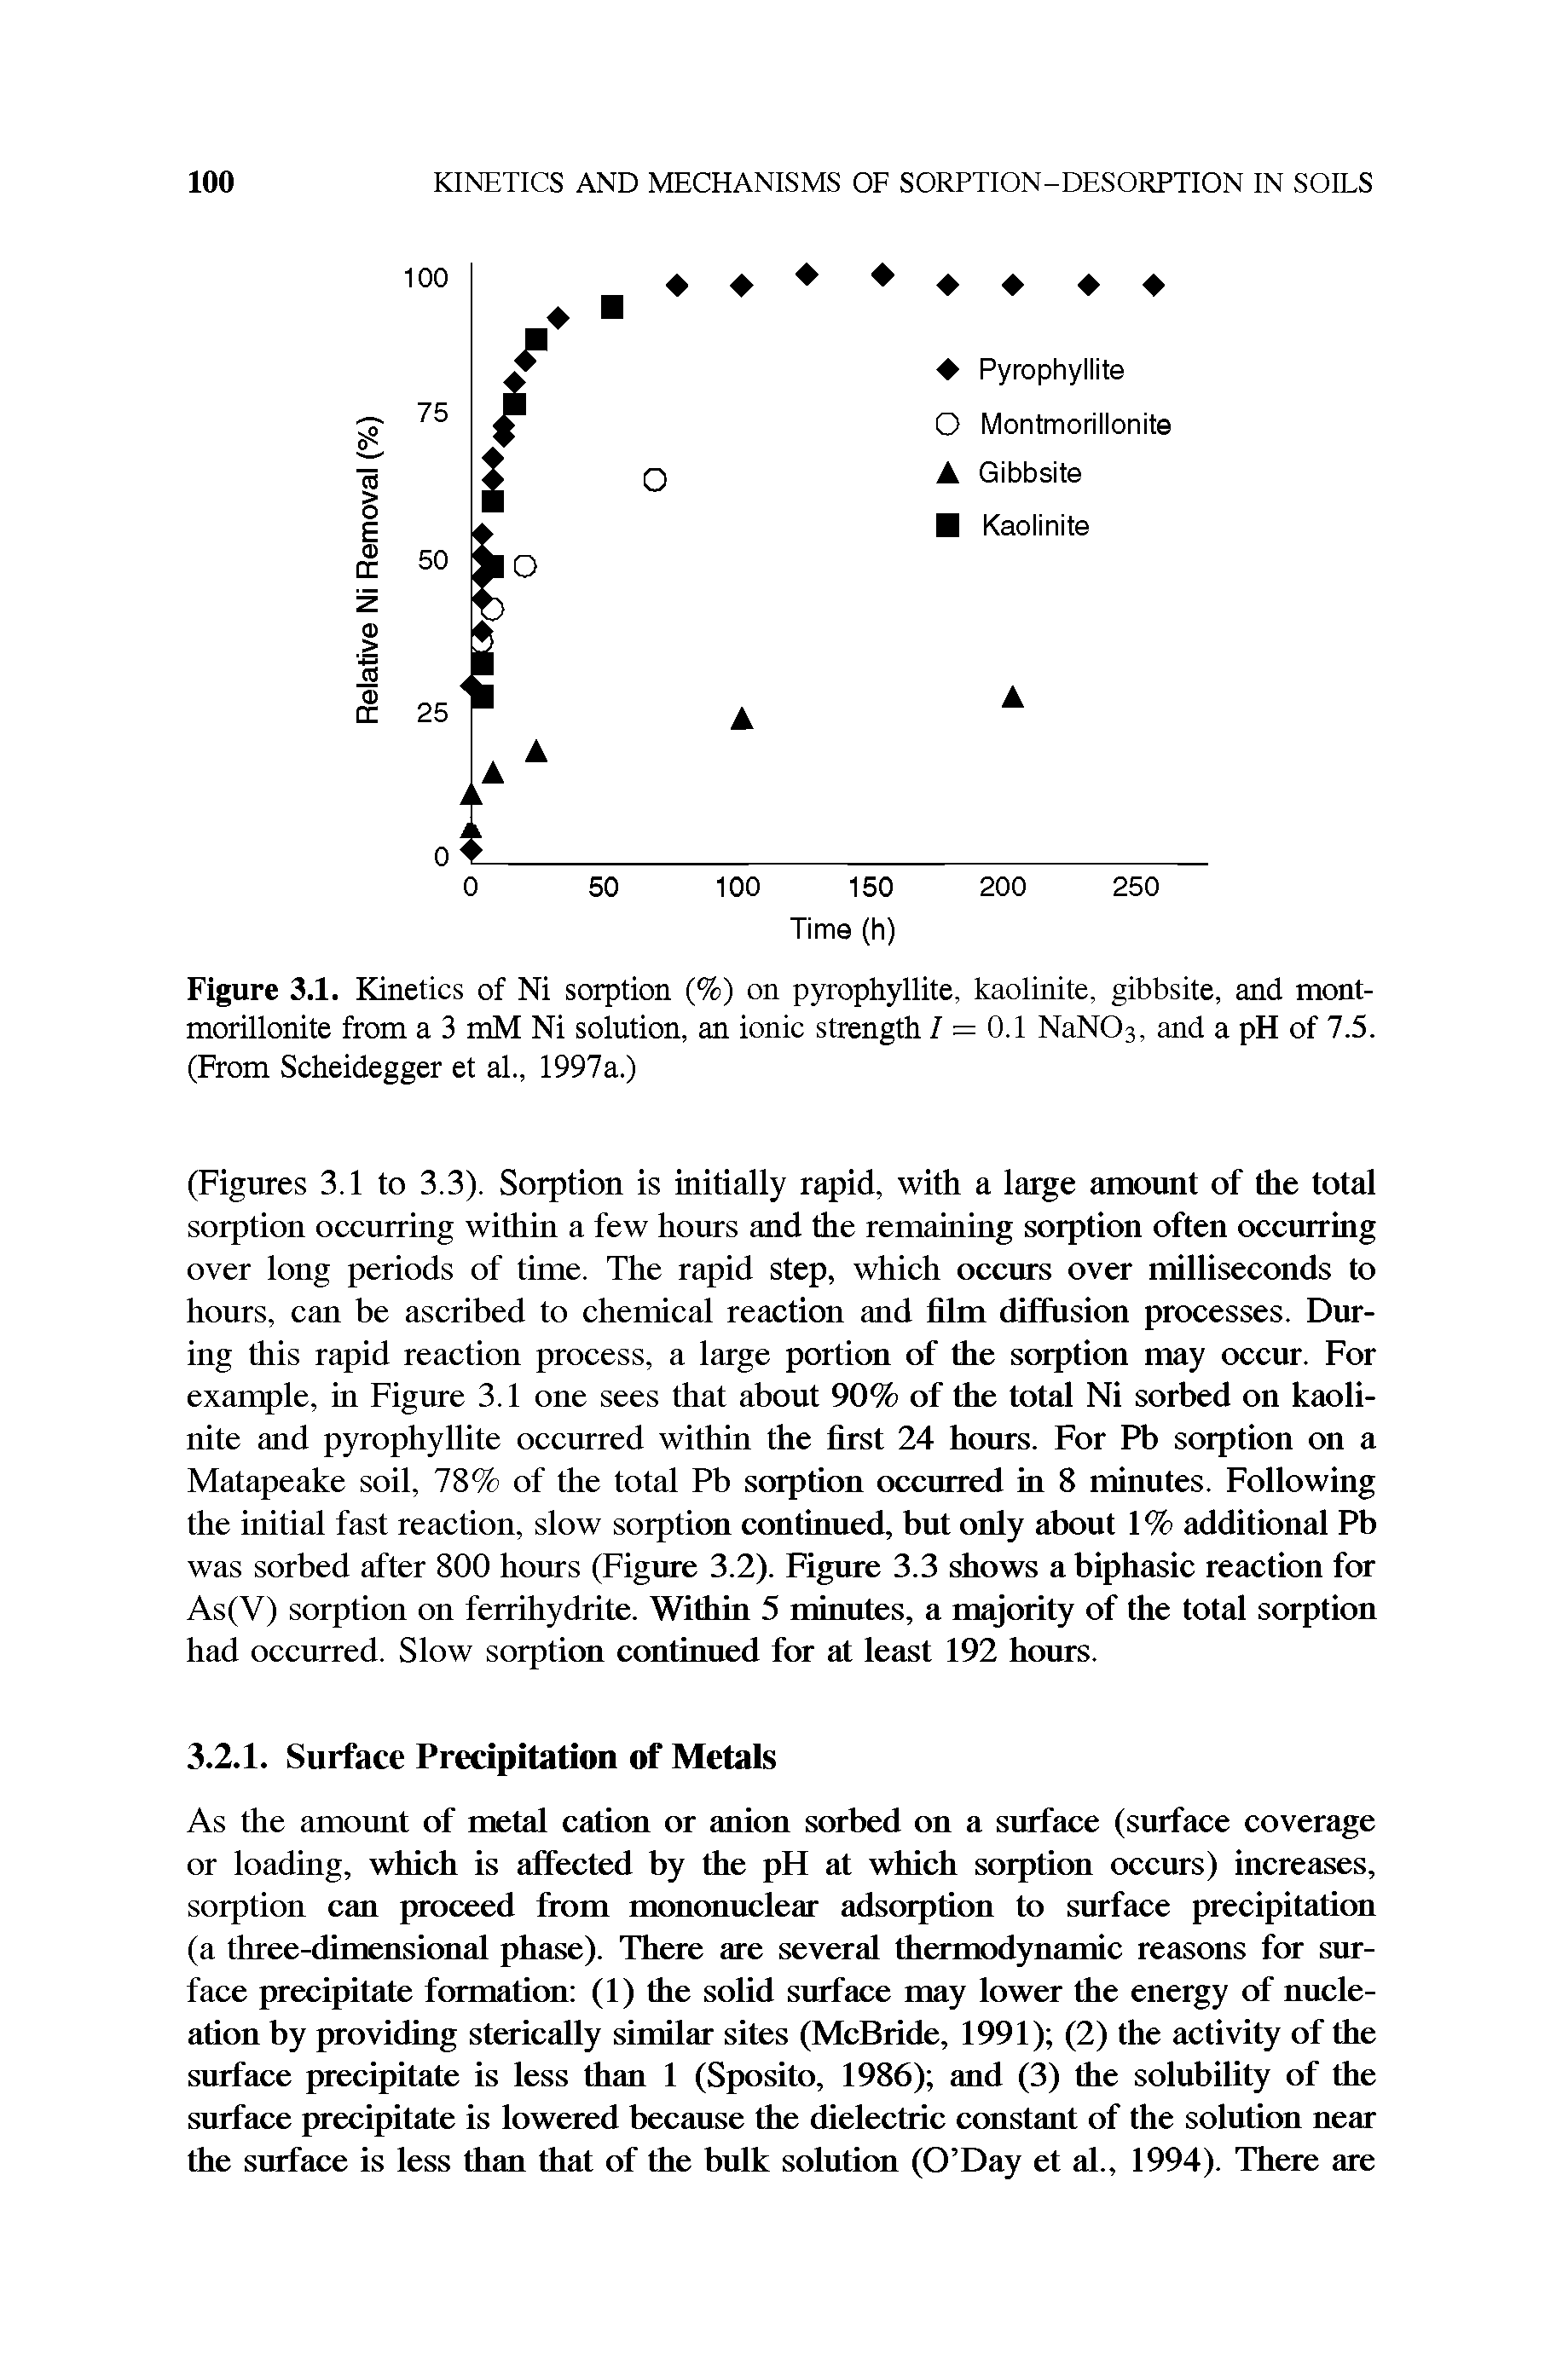 Figure 3.1. Kinetics of Ni sorption (%) on pyrophyllite, kaolinite, gibbsite, and montmorillonite from a 3 mM Ni solution, an ionic strength I = 0.1 NaNOs, and a pH of 7.5. (From Scheidegger et al., 1997a.)...